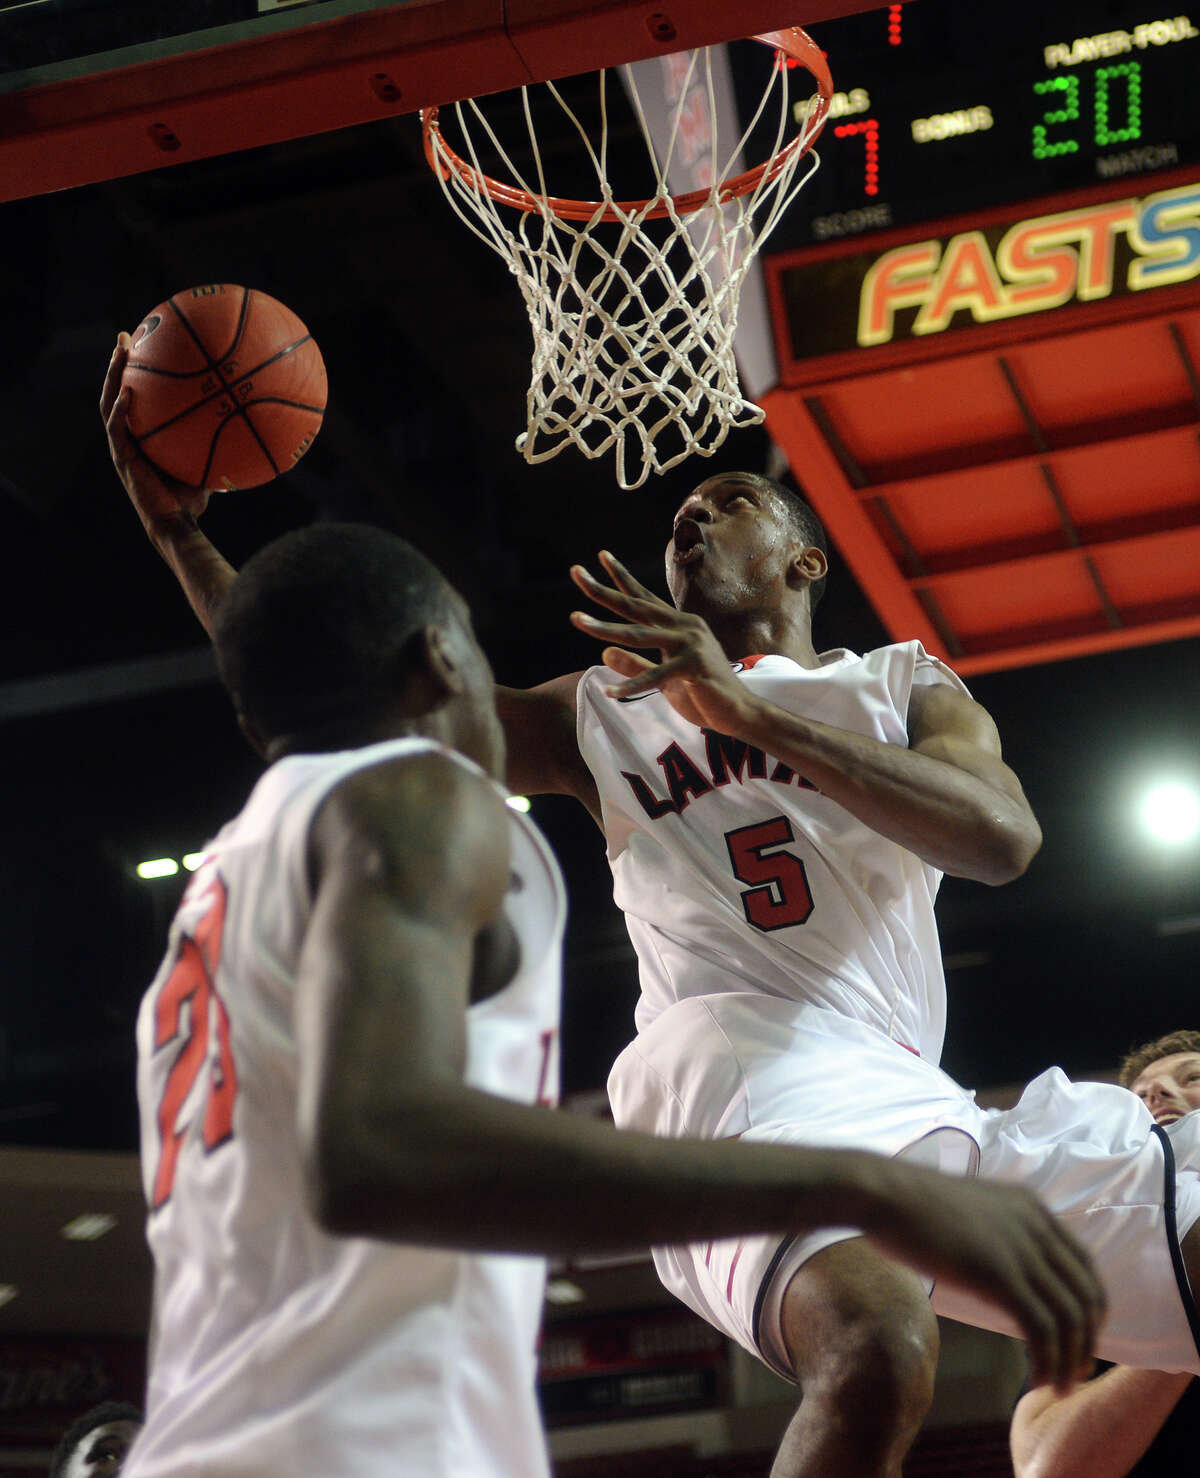 Lamar's Tyran de Lattibeaudiere, No. 5, hooks a shot underneath the basket during Saturday's game against Incarnate Word. The Lamar Cardinals hosted the Incarnate Word Cardinals at the Montagne Center on Saturday night. Photo taken Saturday 2/28/15 Jake Daniels/The Enterprise